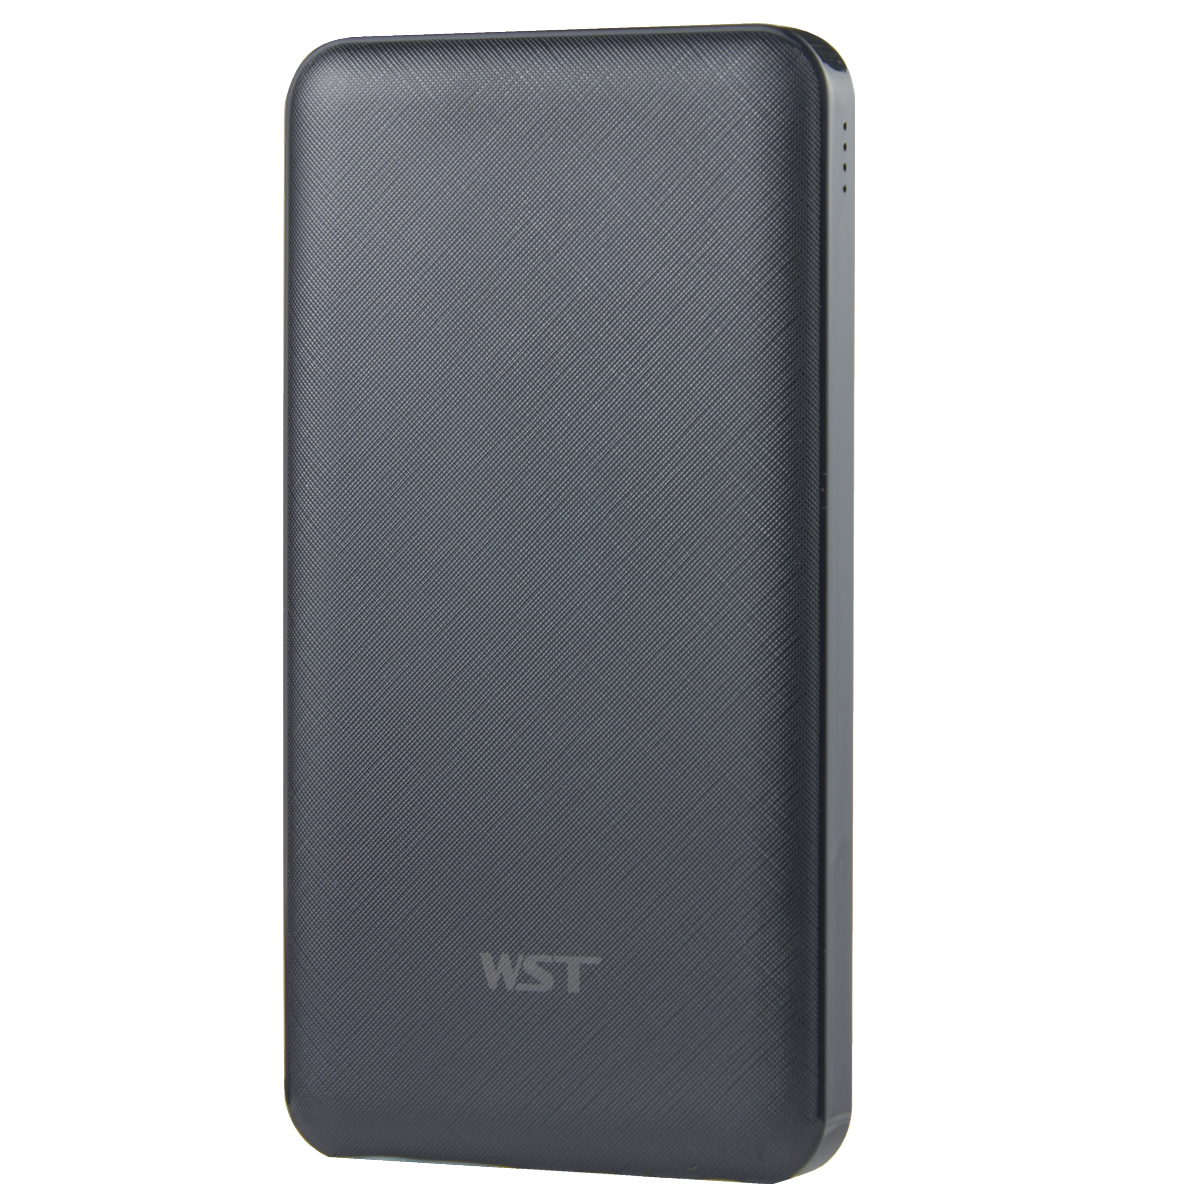 Power bank wst ab847 10000 mah fast charge (crni)